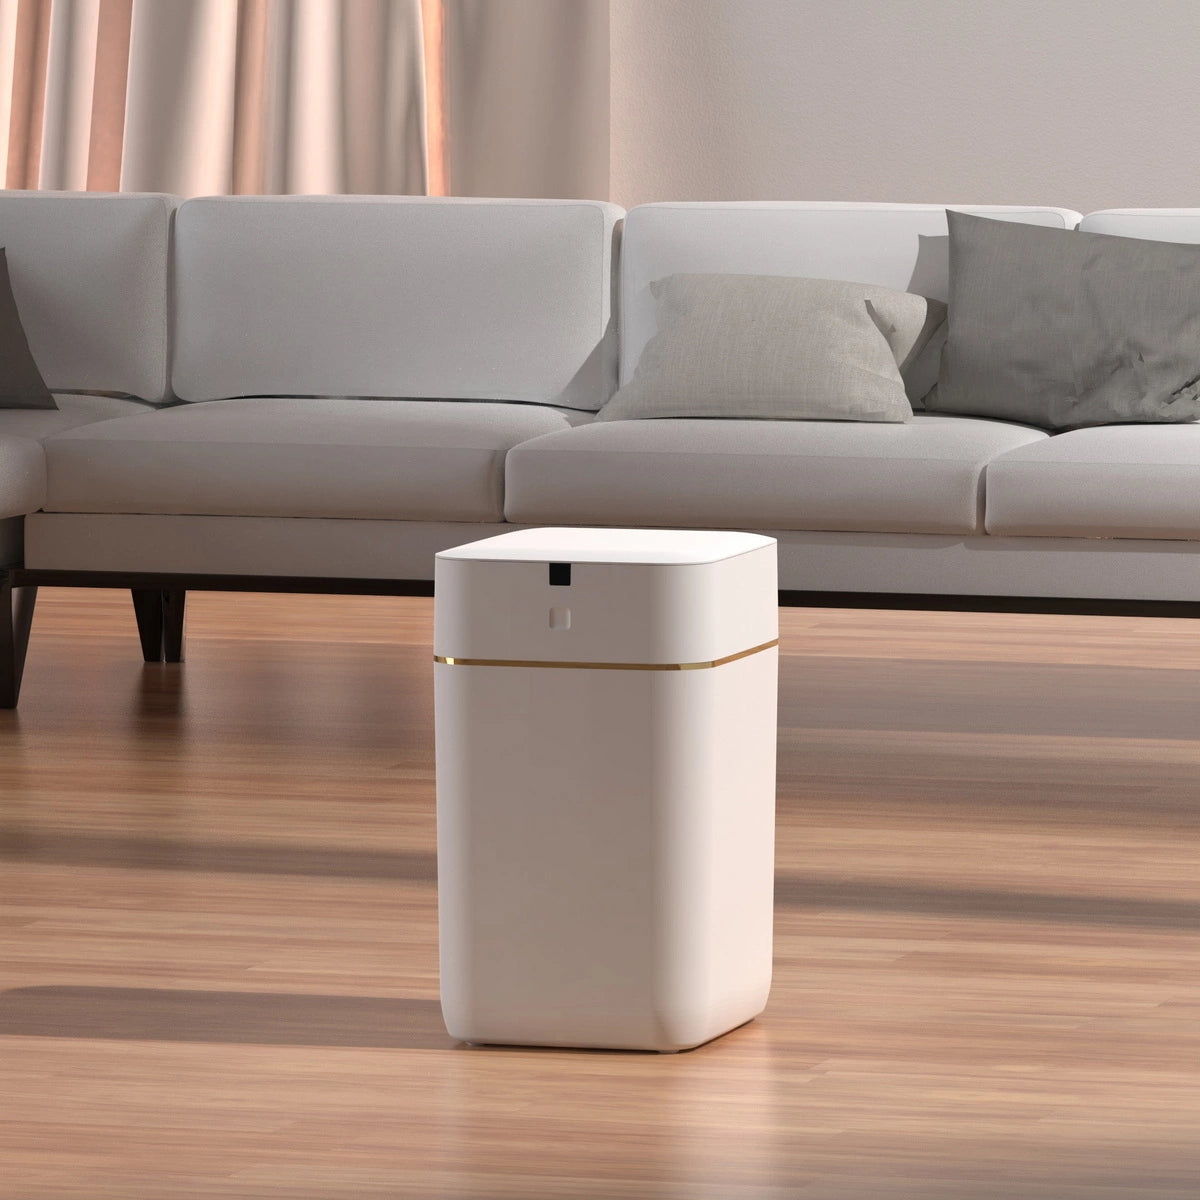 airdeer self-sealing motion sensor trash can suitable for living room and office